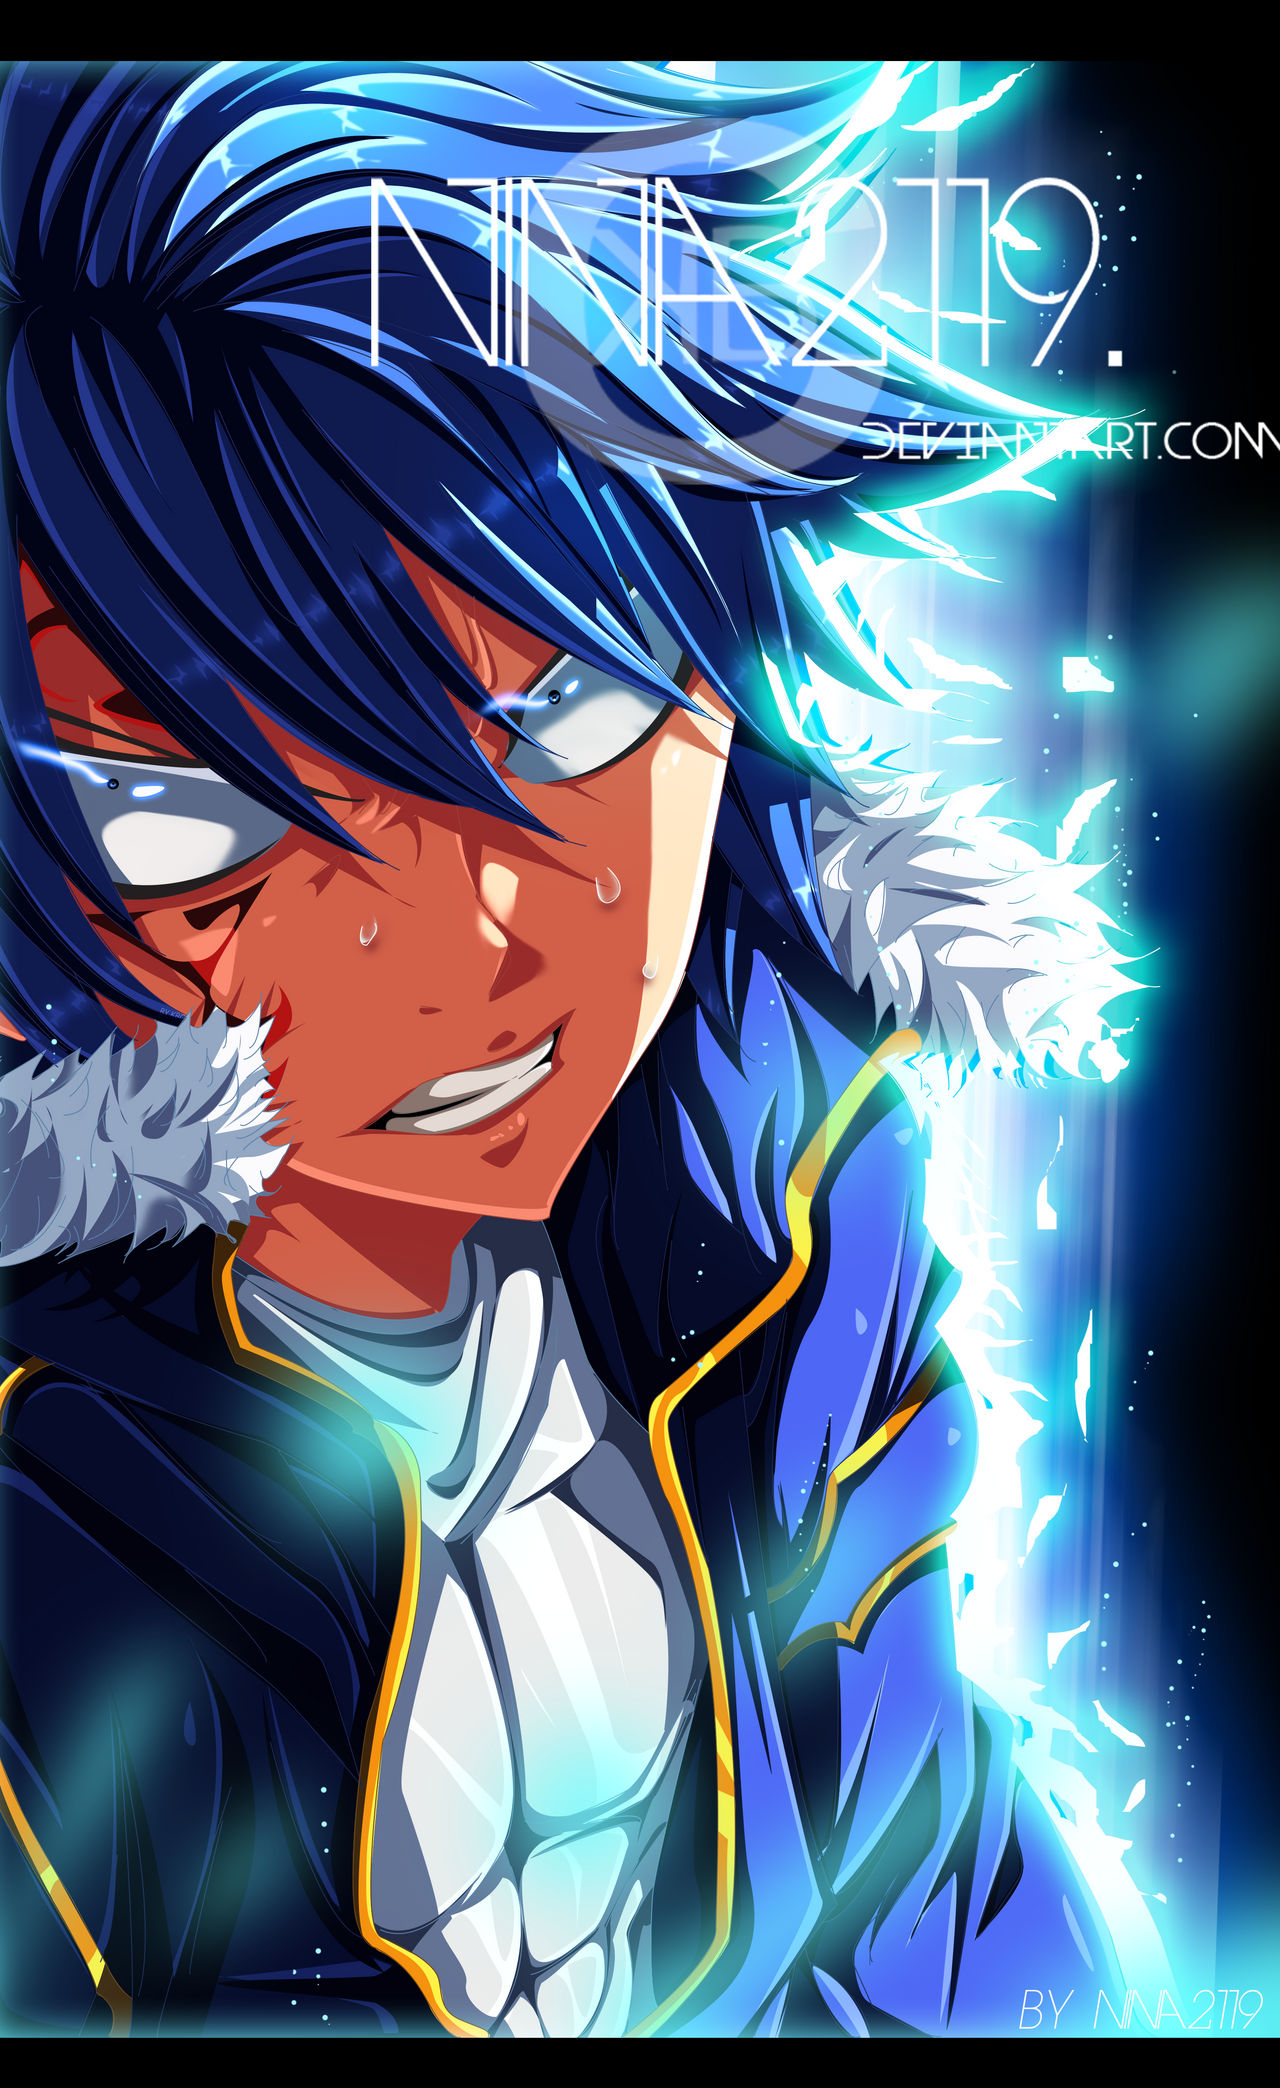 Mainly Faves Fairy Tail Wallpaper by coolkat122 on DeviantArt